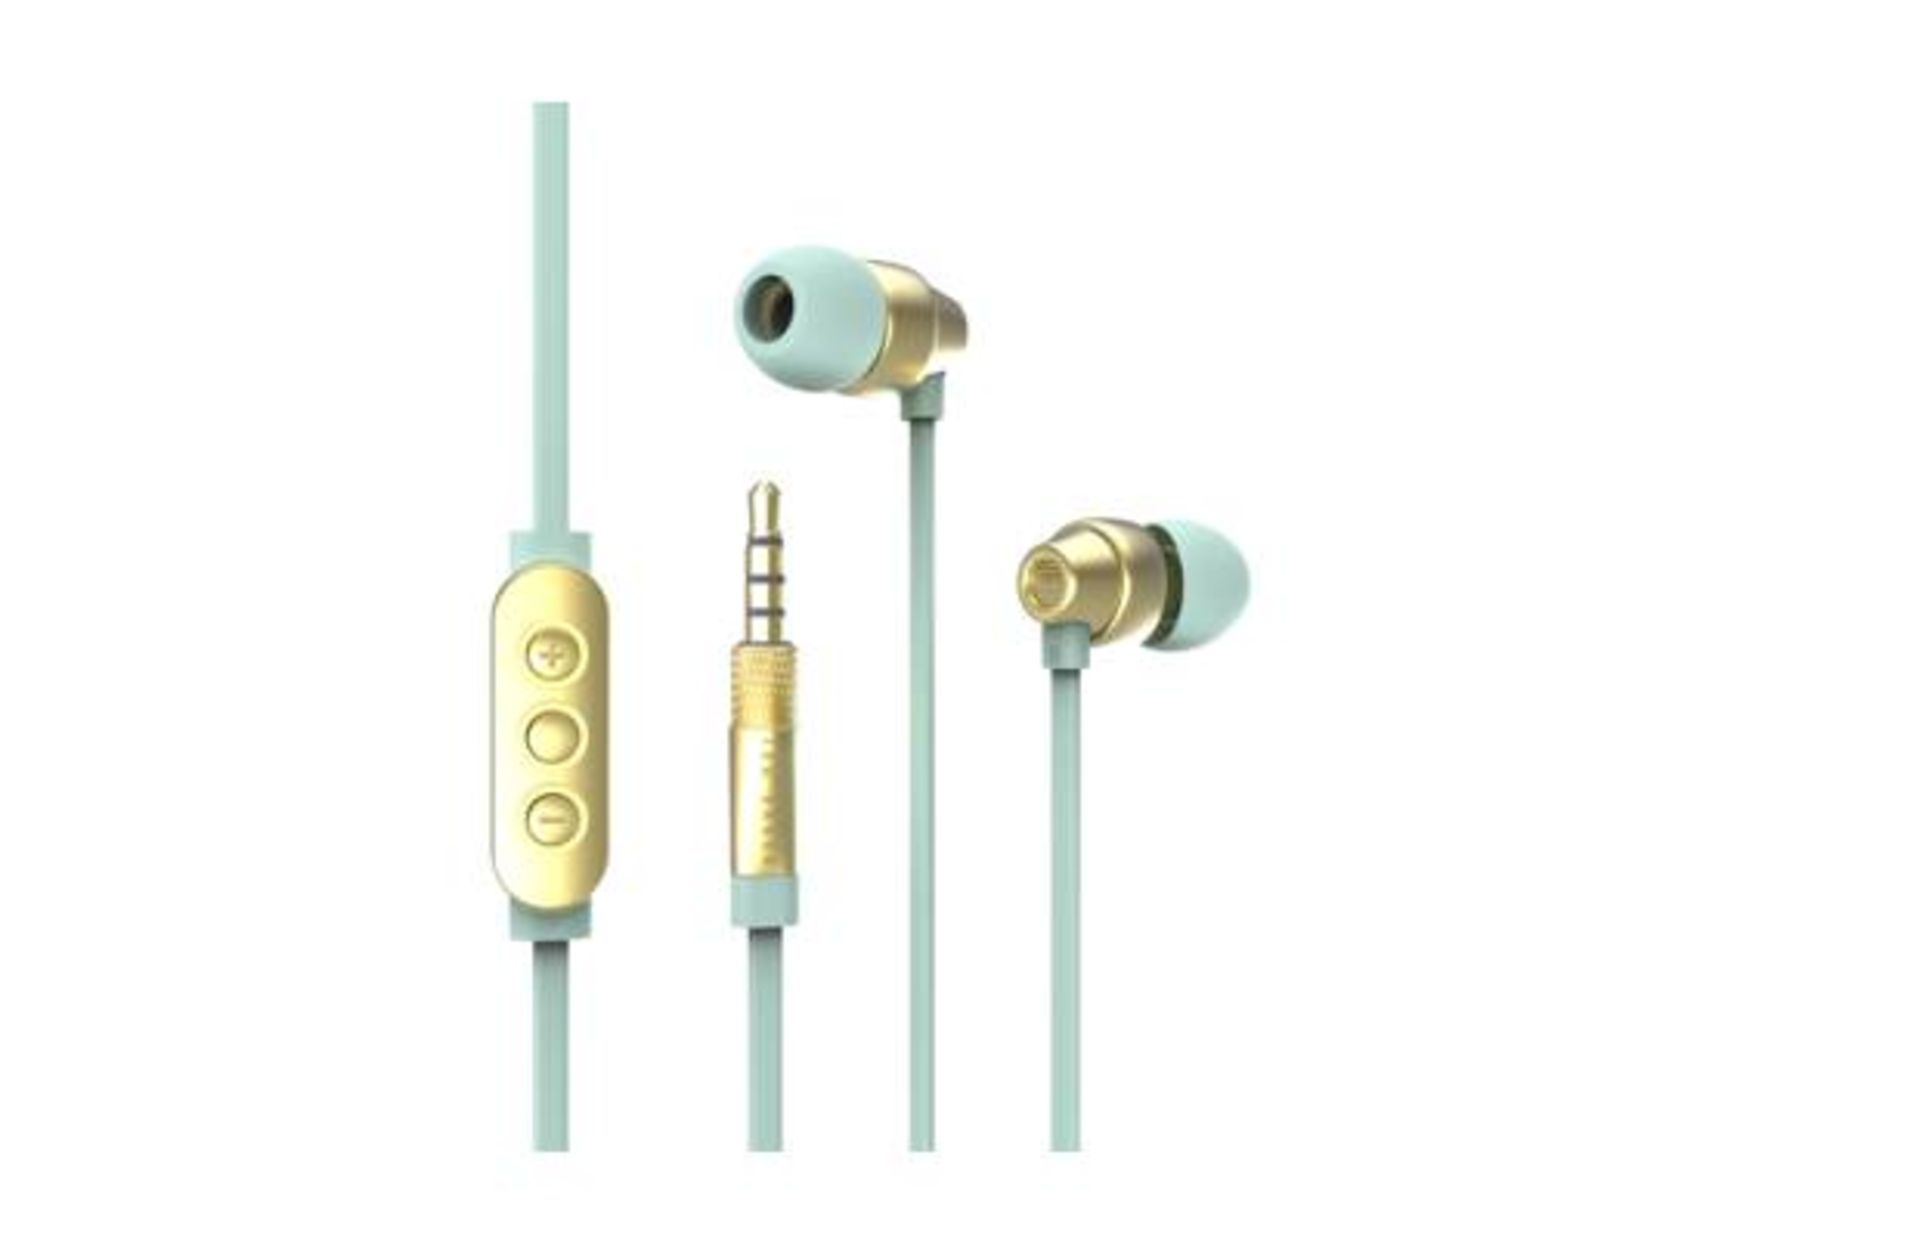 V *TRADE QTY* Brand New Ted Baker Dover In-Ear Headphones In Mint/Gold RRP£59.95 eBay£39.99 X 4 YOUR